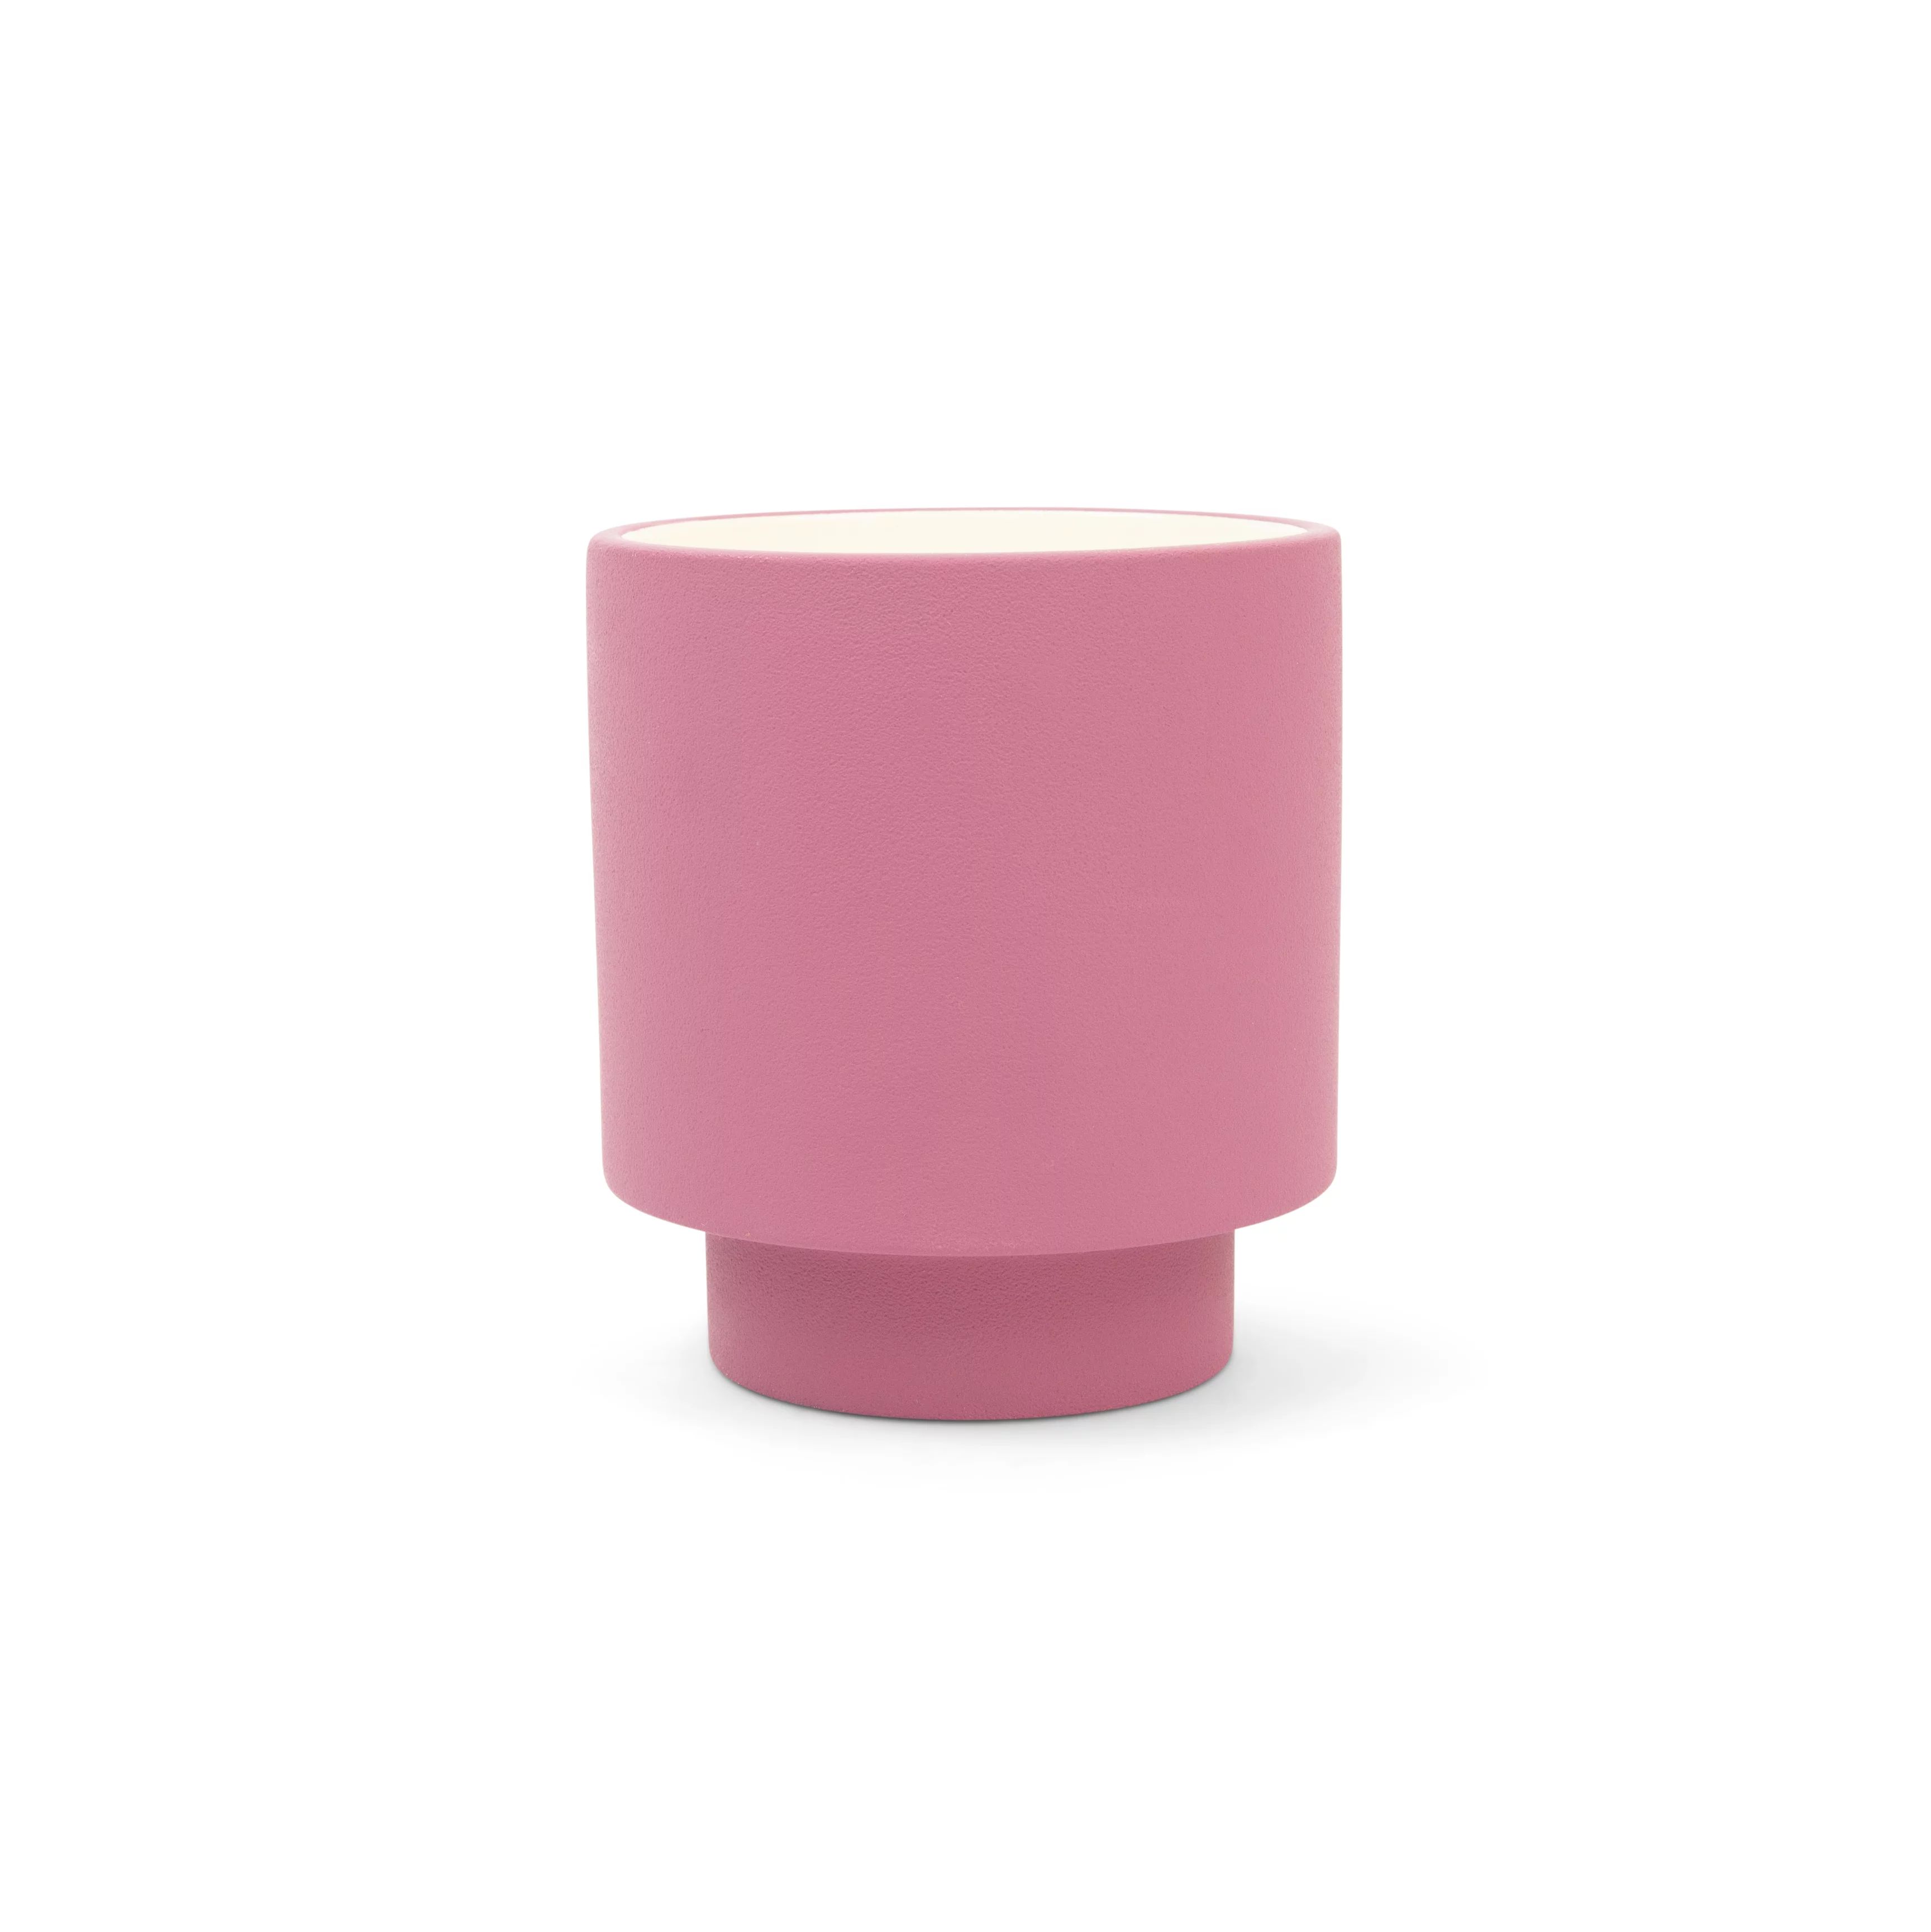 Better Homes & Gardens Rhubarb & Rose Scented 14oz Single Wick Ceramic Candle | Walmart (US)